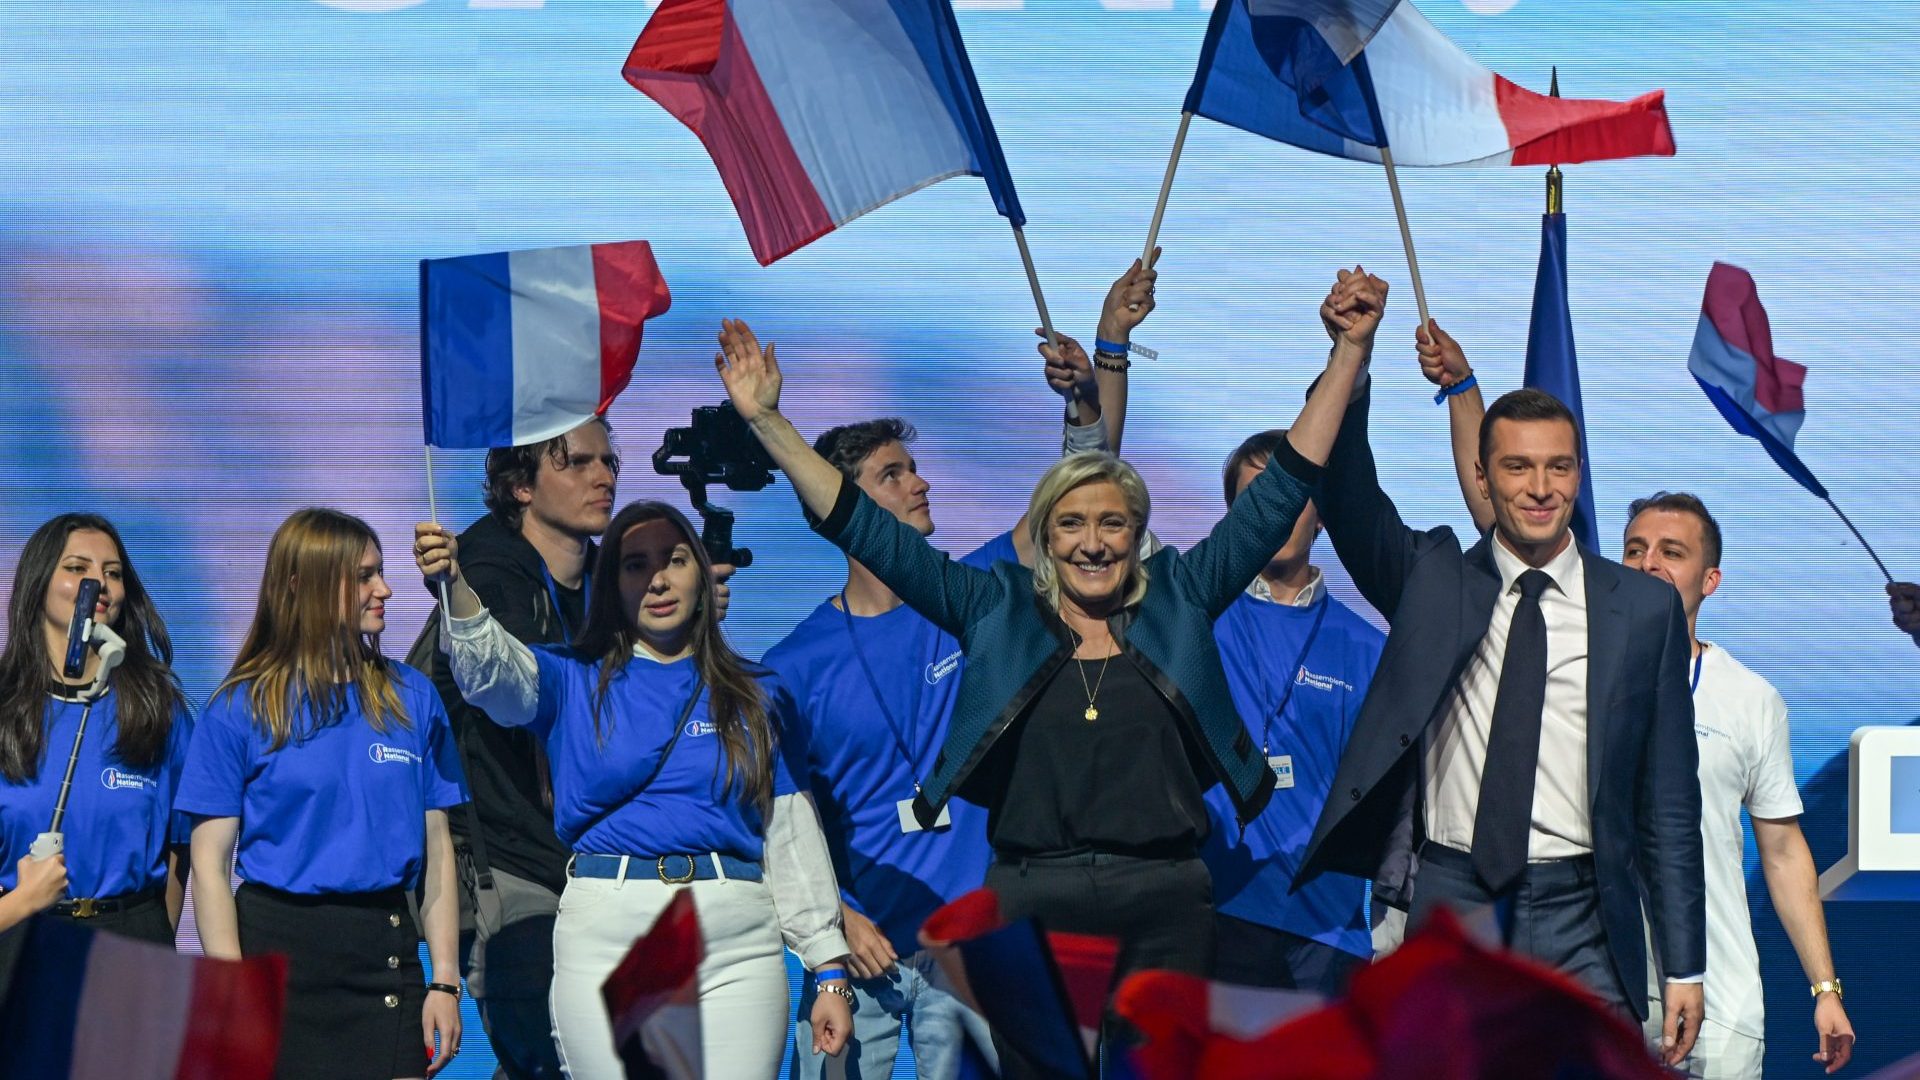 Marine Le Pen, President of the National Rally group in the National Assembly, joins Jordan Bardella, President of the National Rally (Rassemblement National), at the final rally before the upcoming European Parliament election. Photo: Artur Widak/NurPhoto via Getty Images